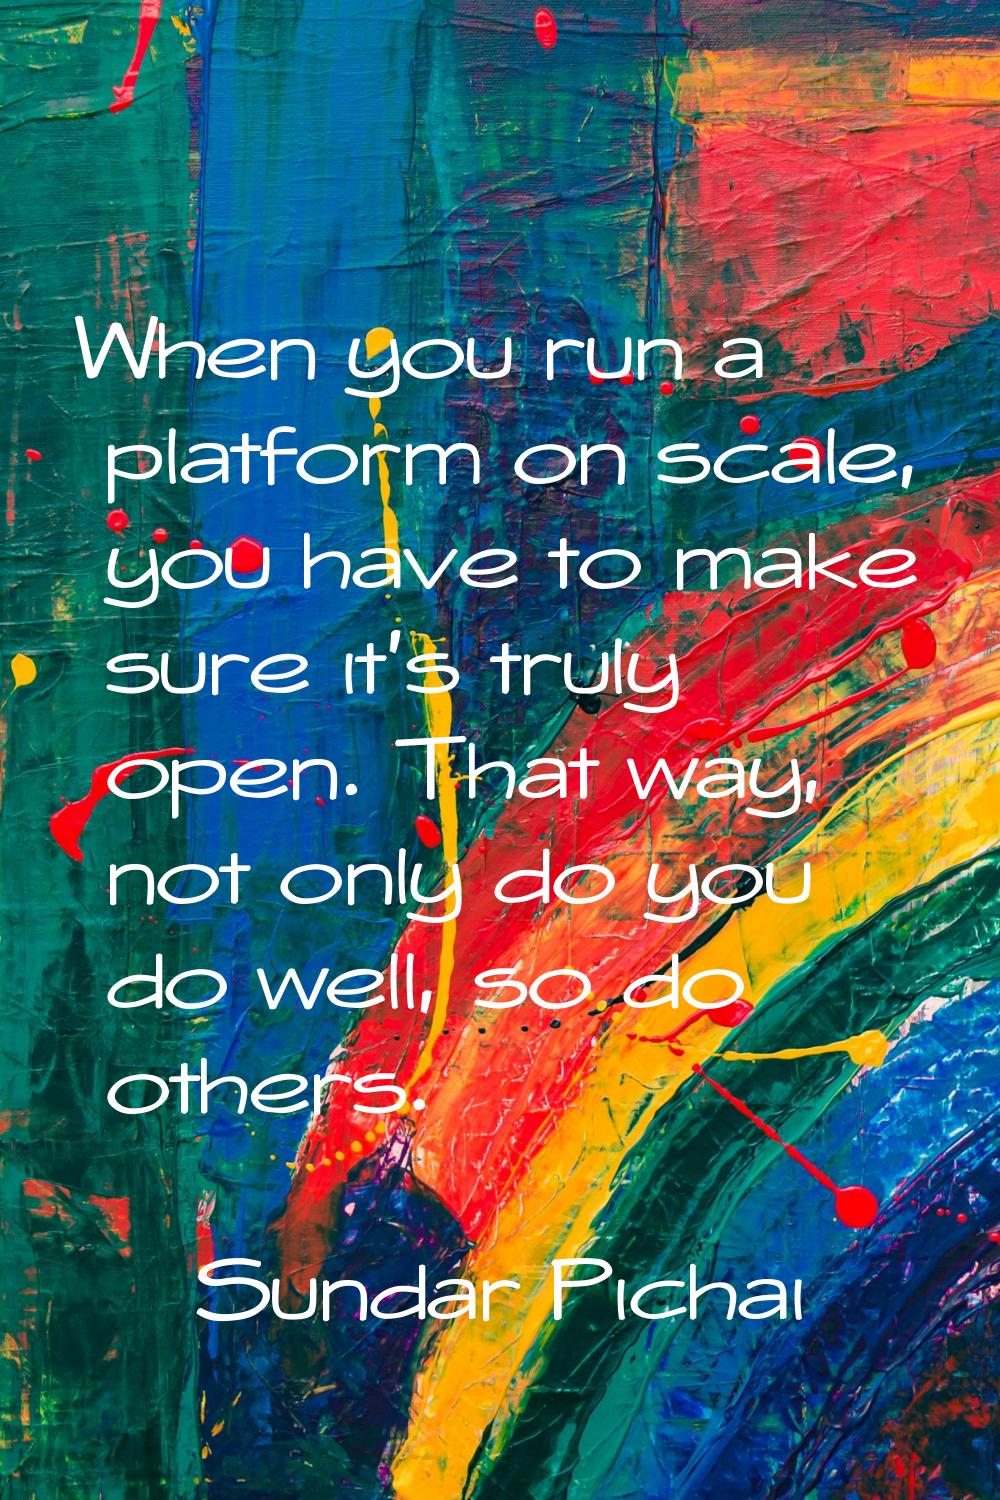 When you run a platform on scale, you have to make sure it's truly open. That way, not only do you 